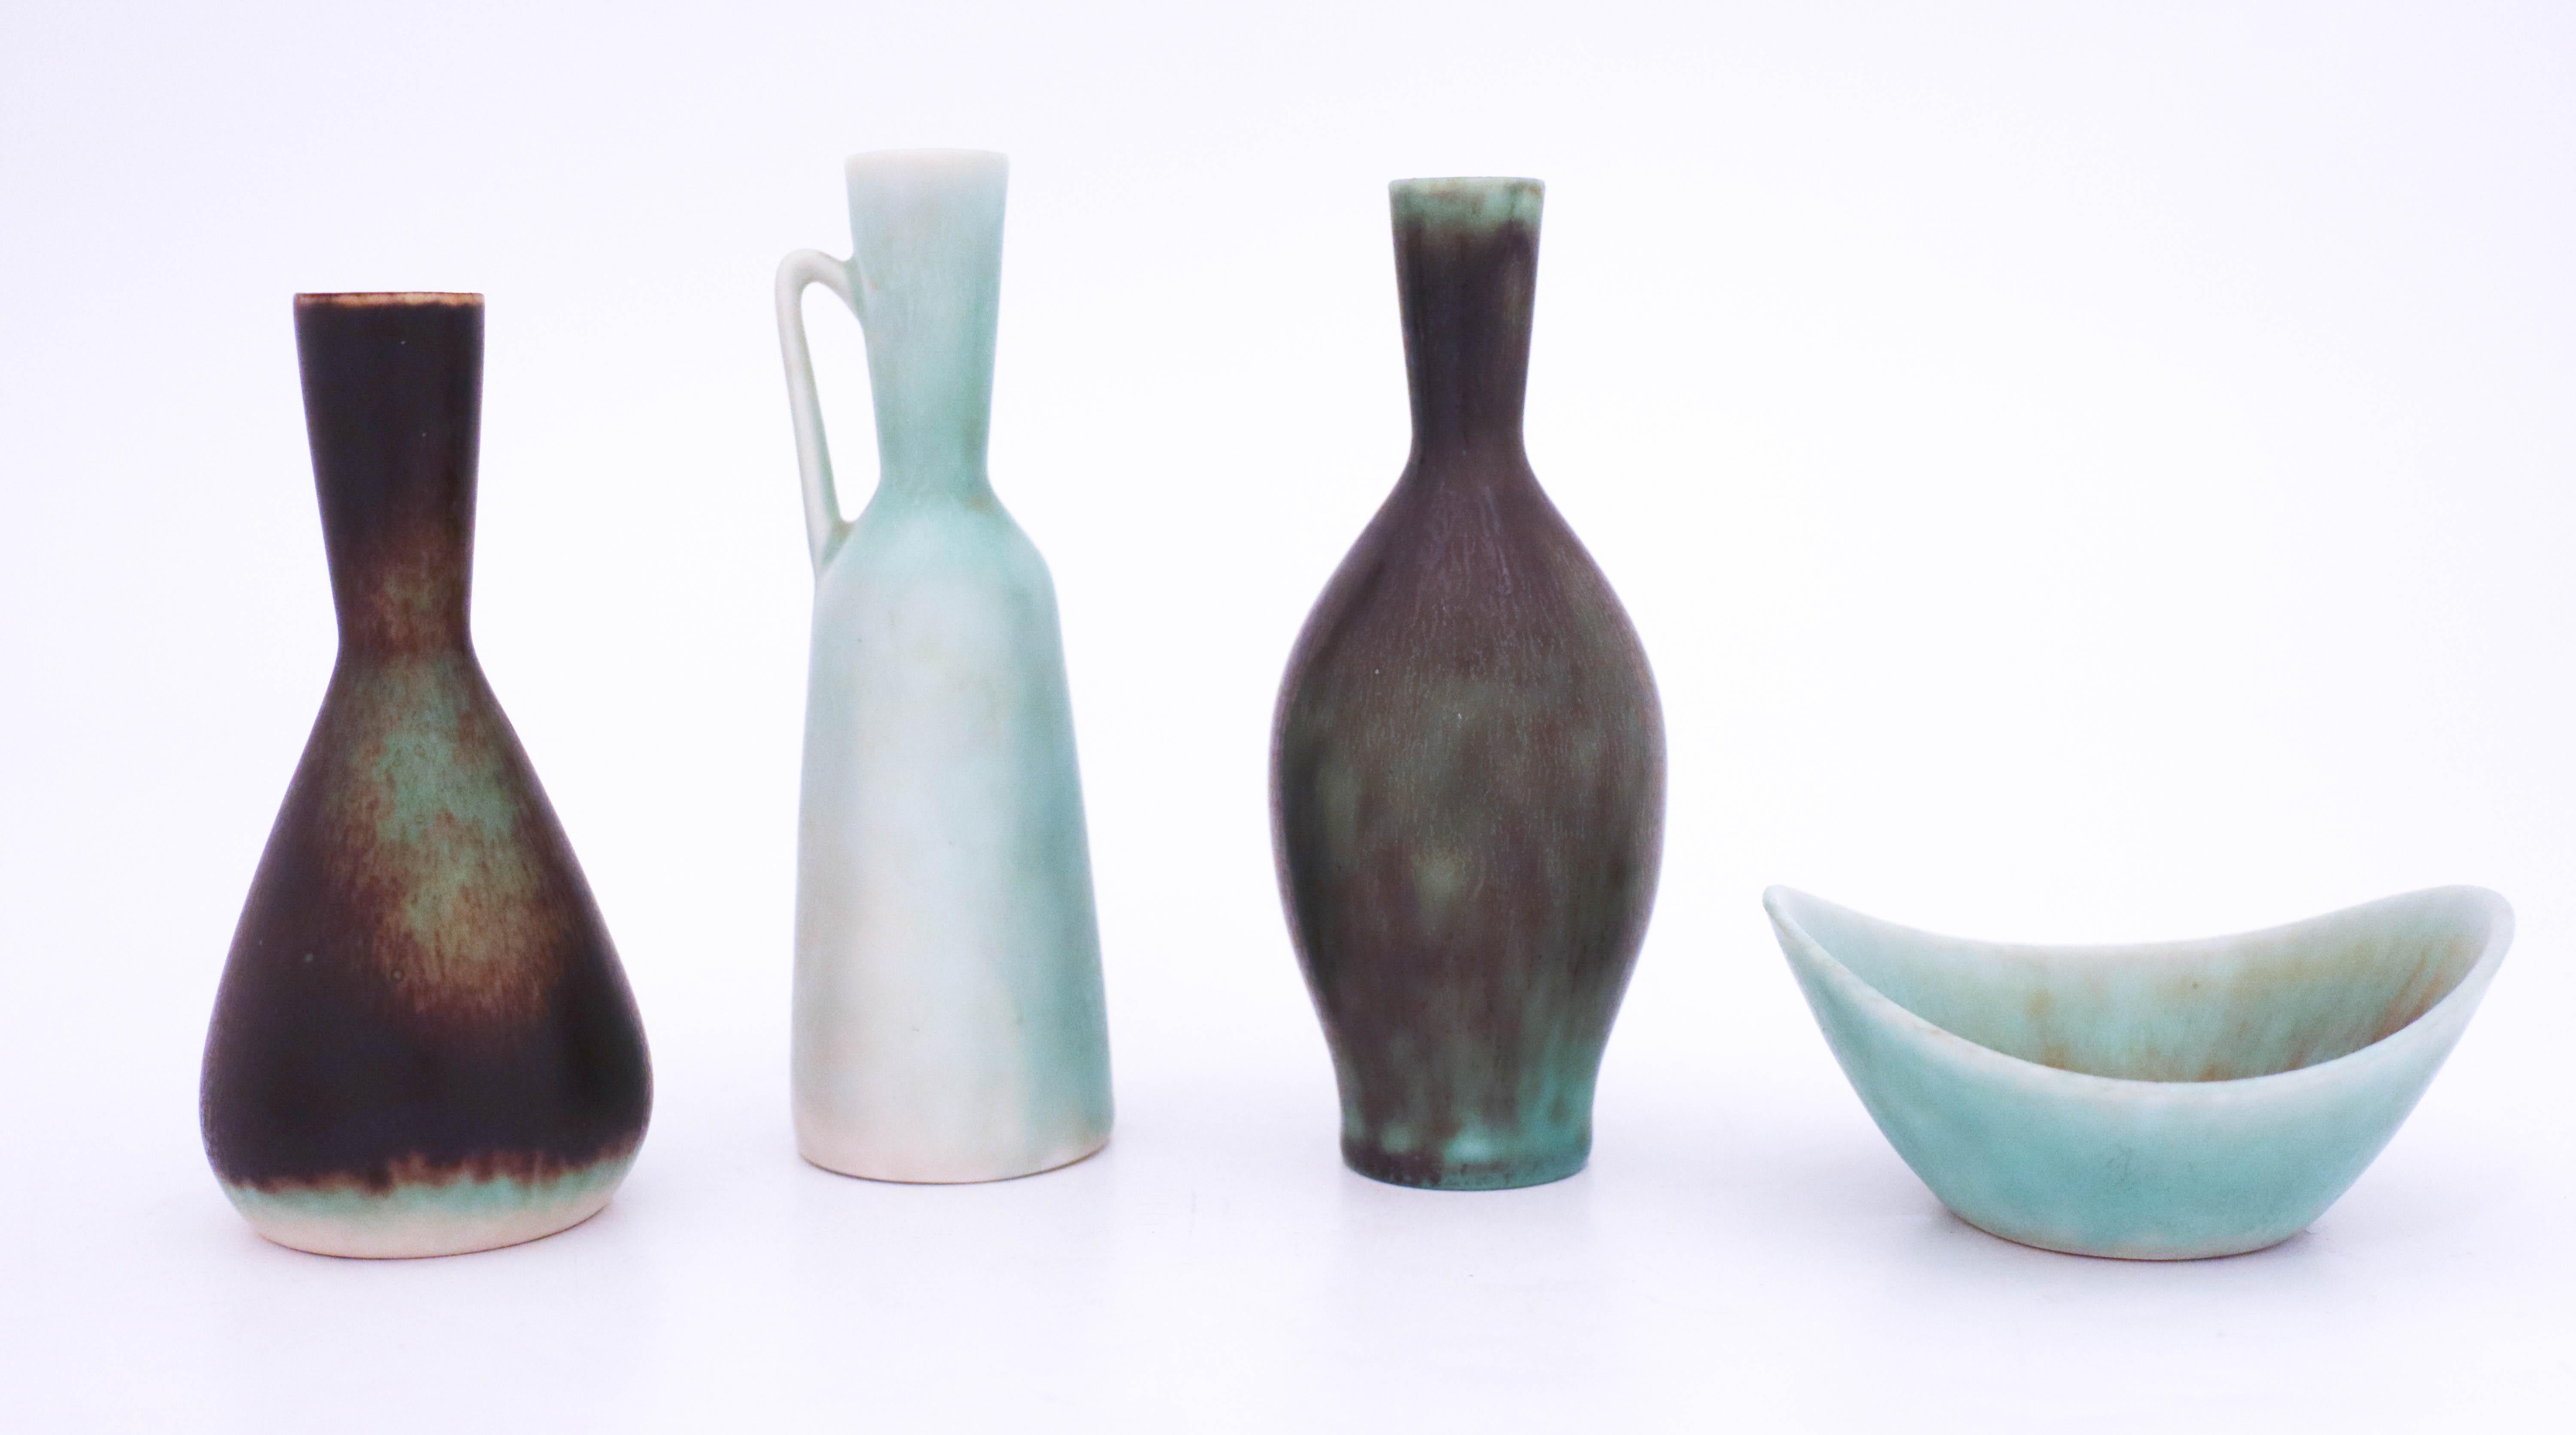 A group of four vases designed by Carl-Harry Stålhane at Rörstrand in turquoise to dark green or black color. The vases are 12.3-10.5 cm high and the bowl is 8.5 x 7 cm in diameter, all of them are marked as 1st quality. They are in very good